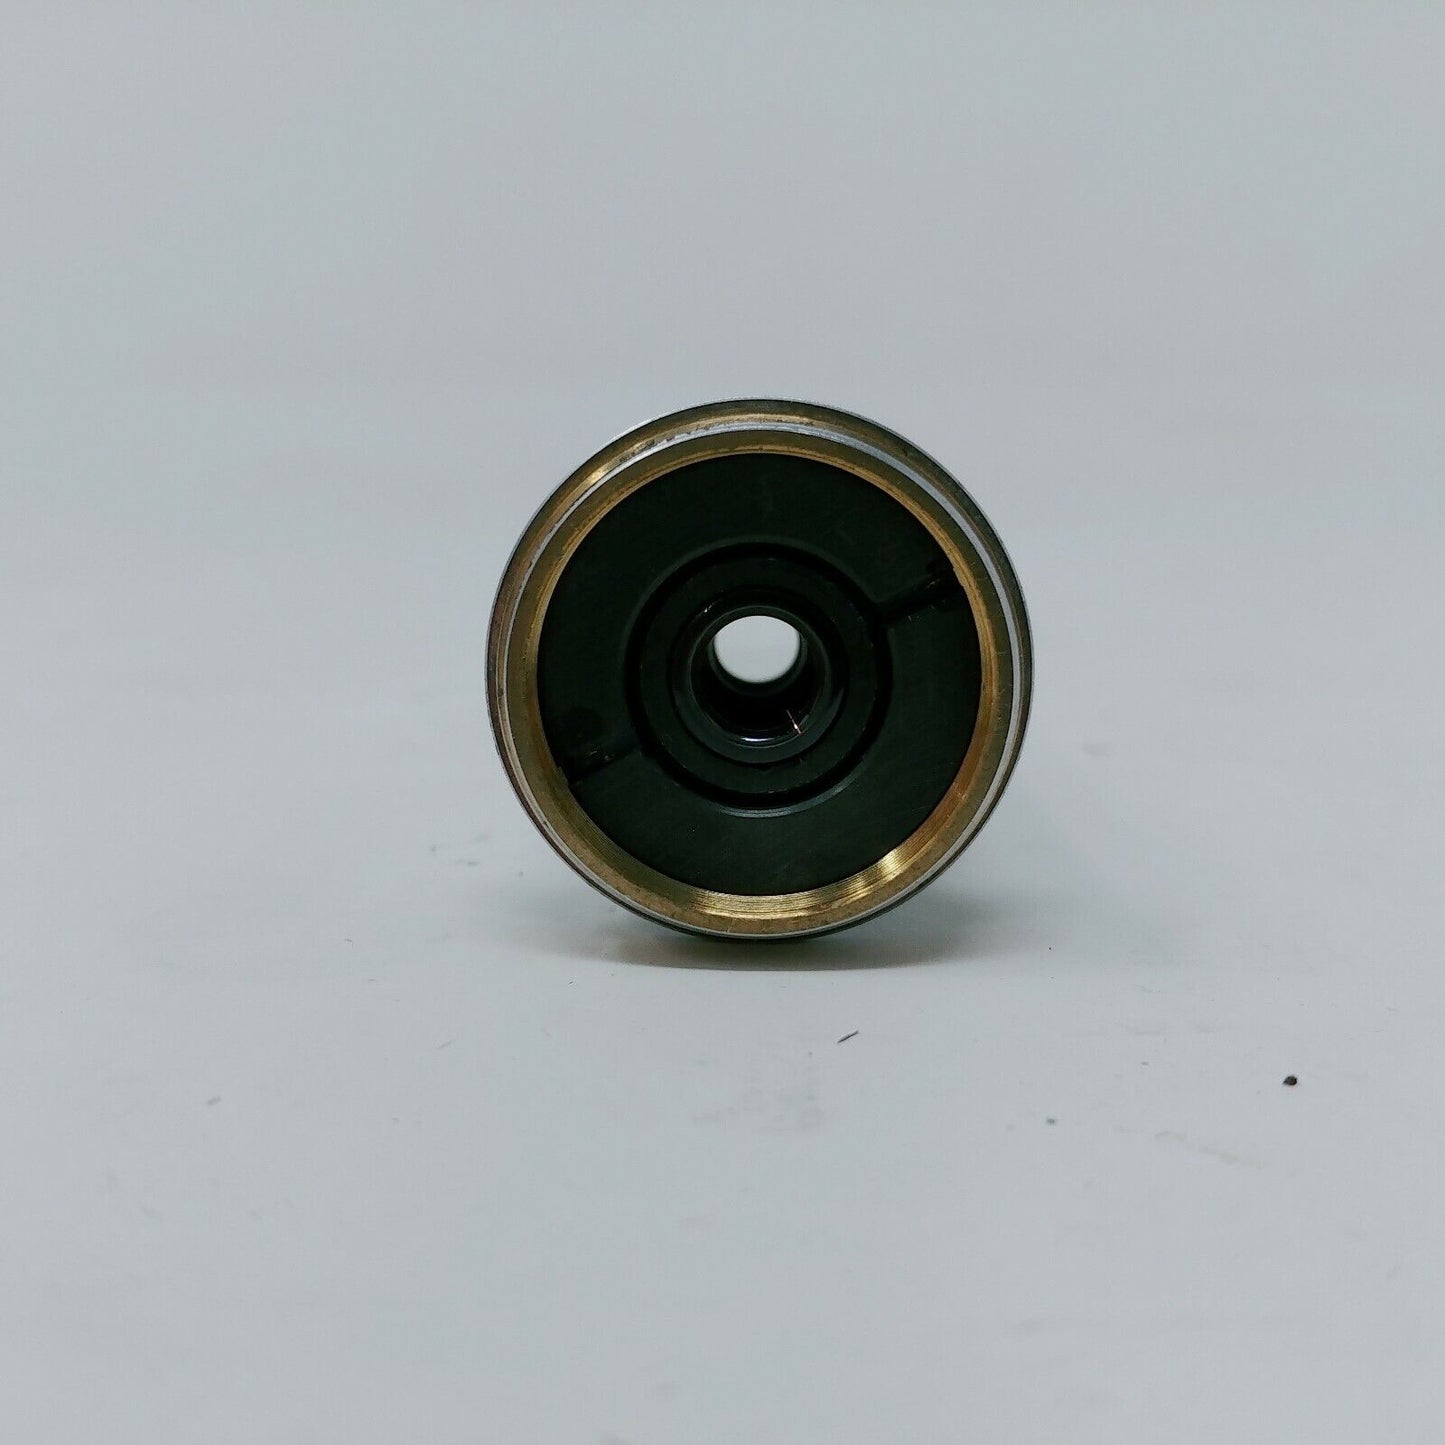 Leica Microscope Objective C Plan L40x / 0.50 506149 for Inverted - microscopemarketplace